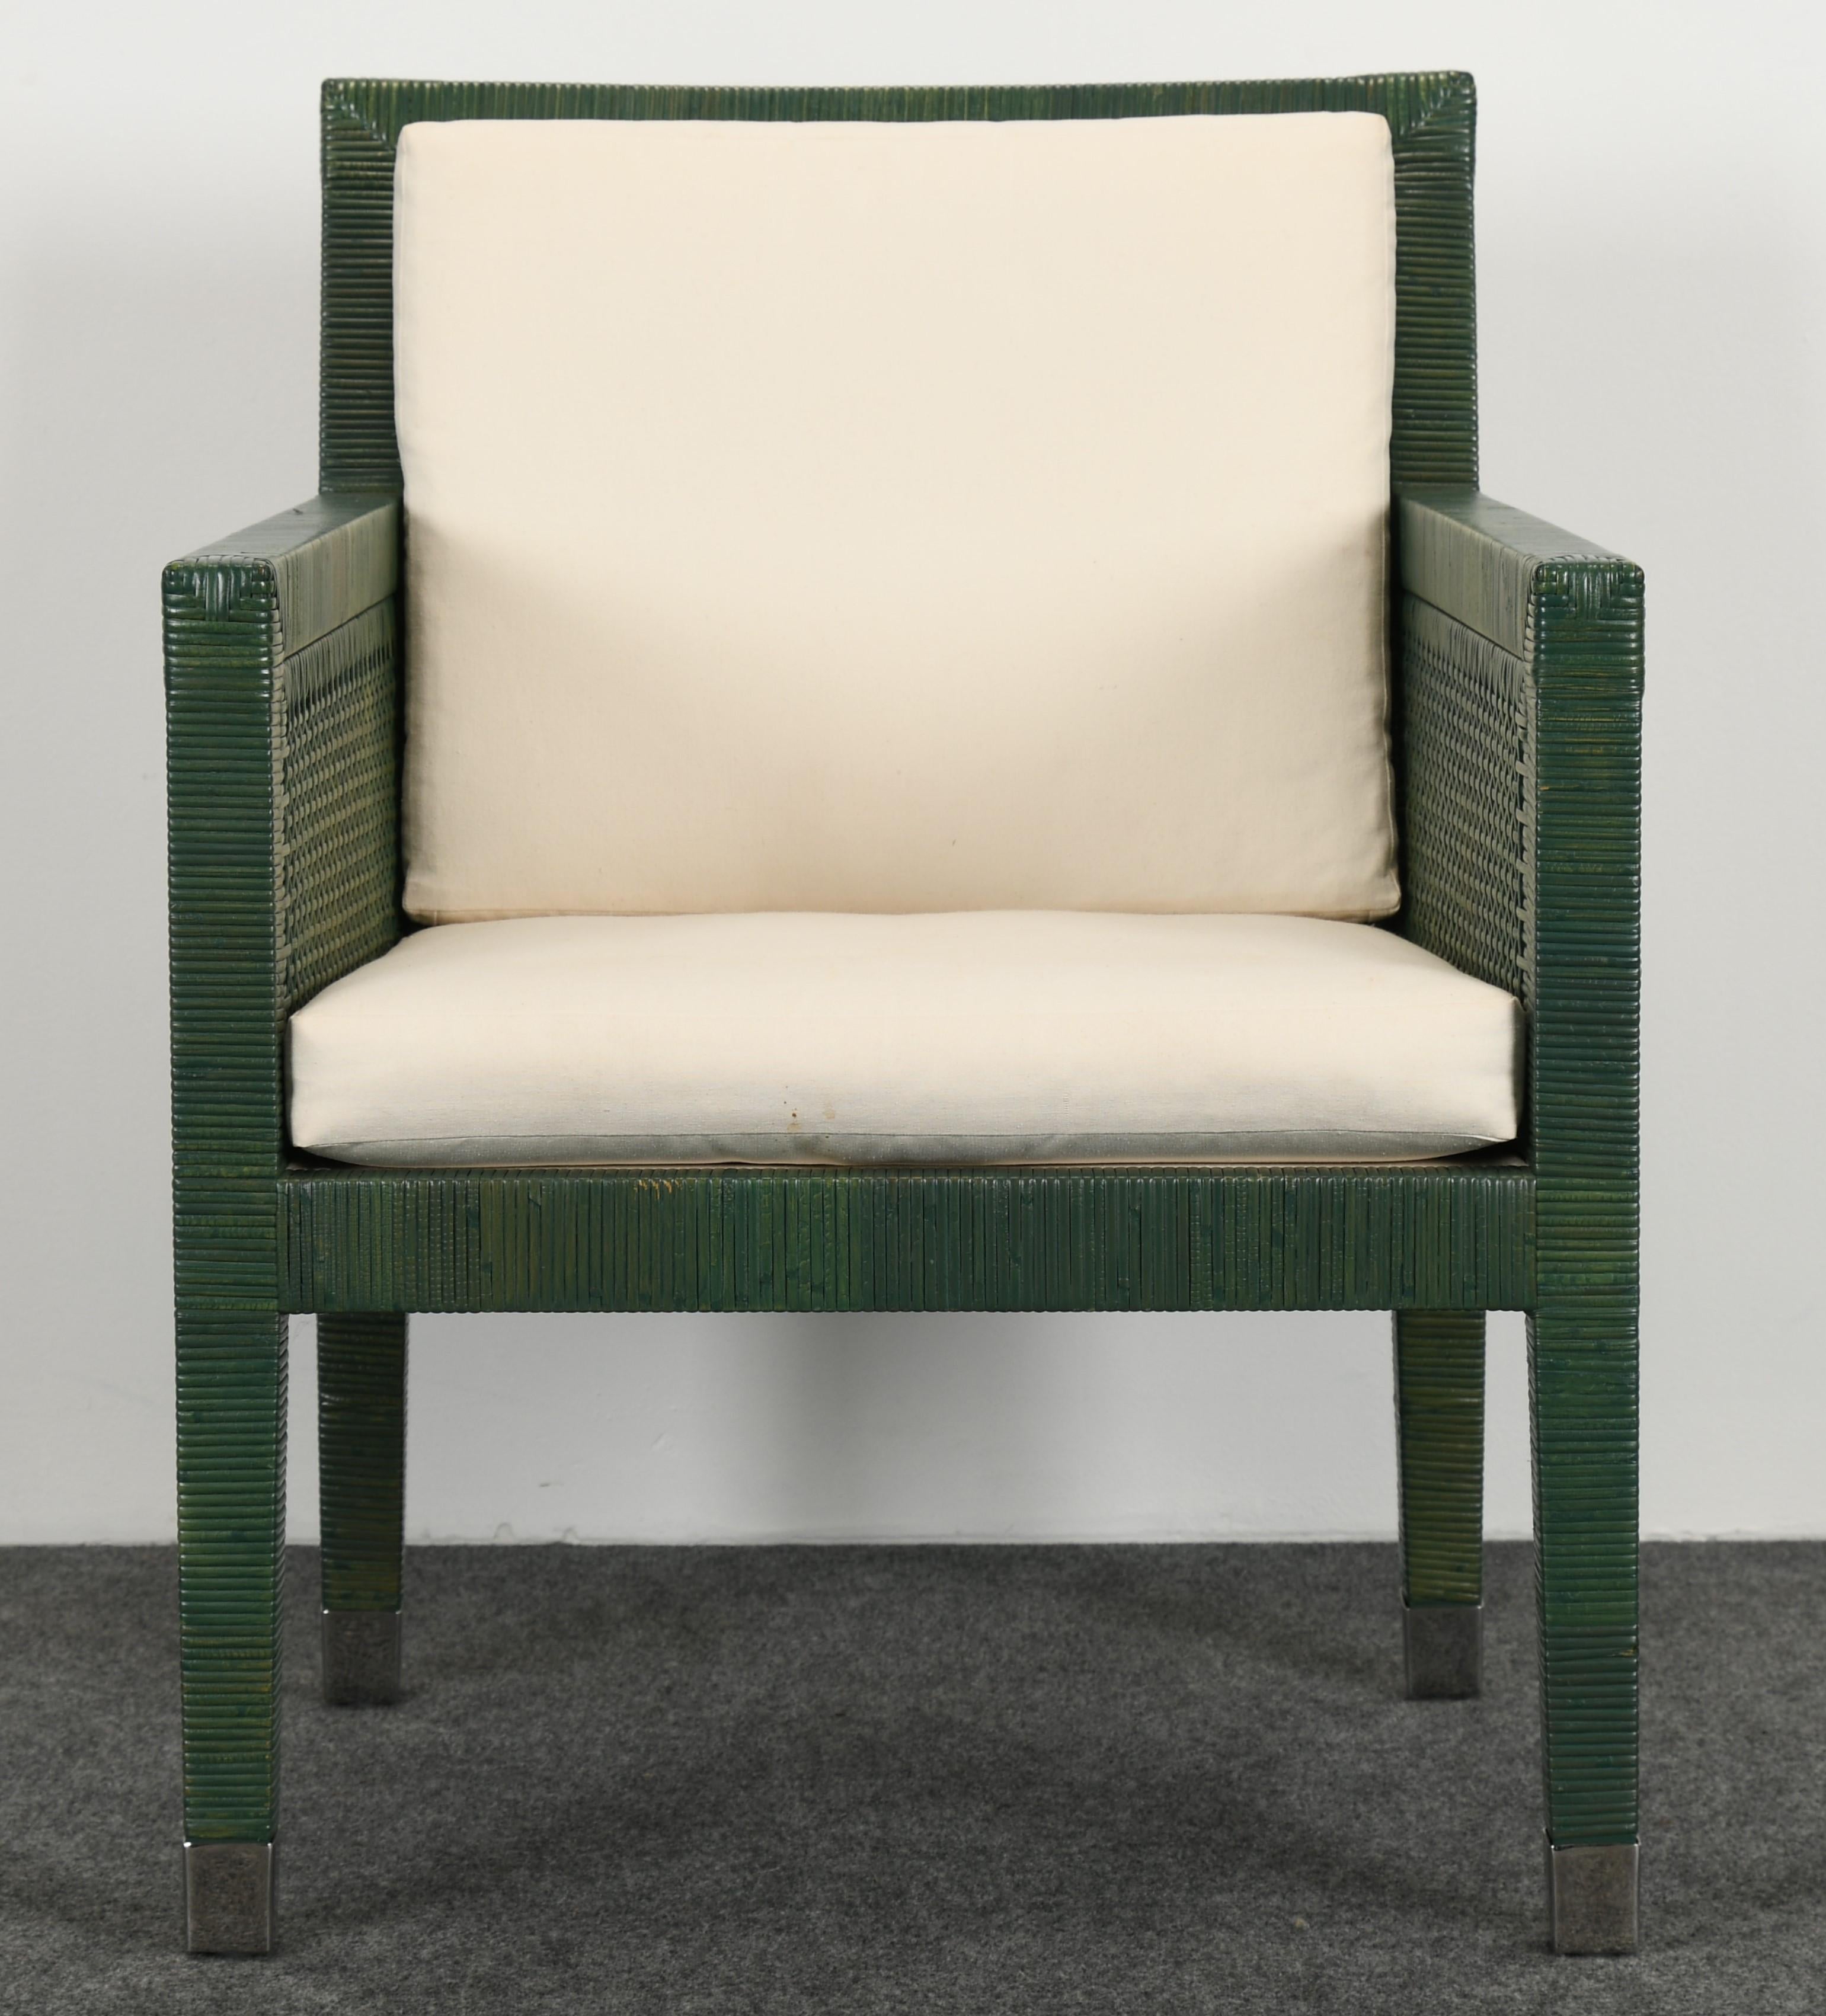 Bielecky Brothers Rattan and stainless steel armchair, 1980s. The furniture made by Bielecky Brothers is owned by celebrities and those with discerning taste around the globe. The armchair has a vintage green painted finish with capped stainless